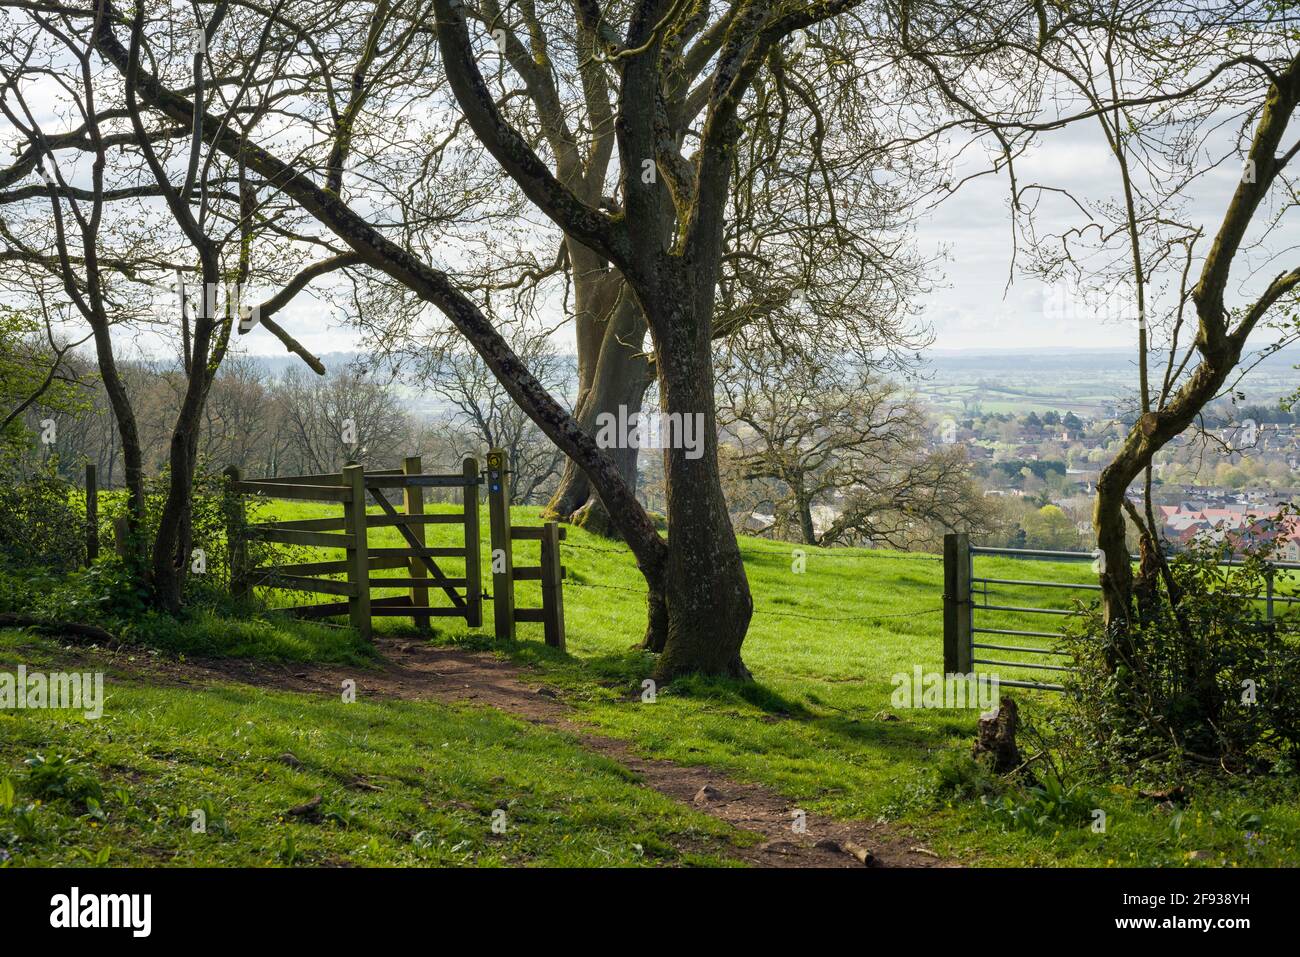 A kissing gate on the West Mendip Way on Milton Hill on the edge of the Mendip Hills overlooking the City of Wells, Somerset, England. Stock Photo